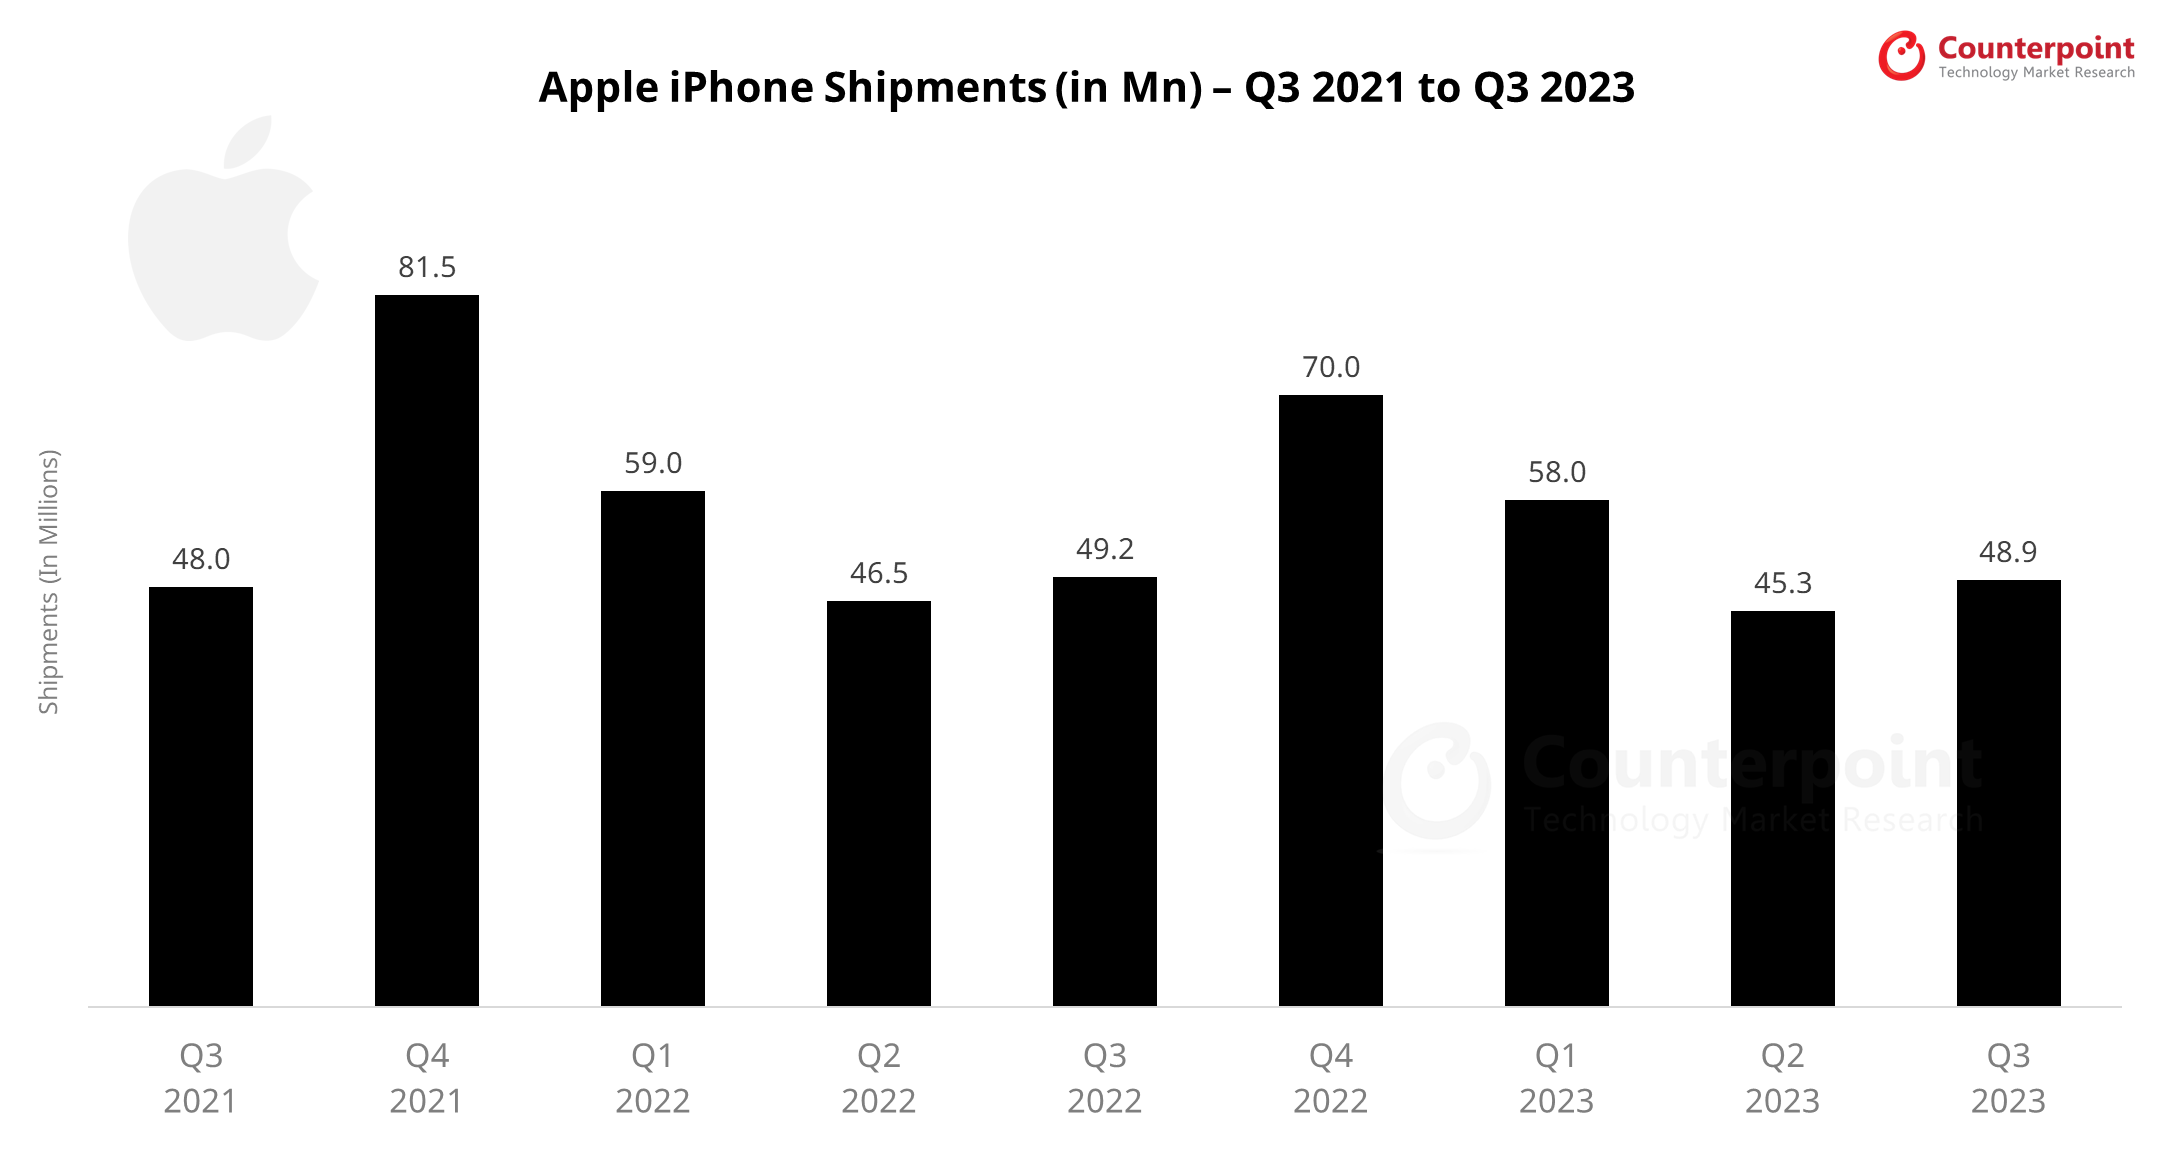 Counterpoint Apple iPhone Shipments Q3 2023